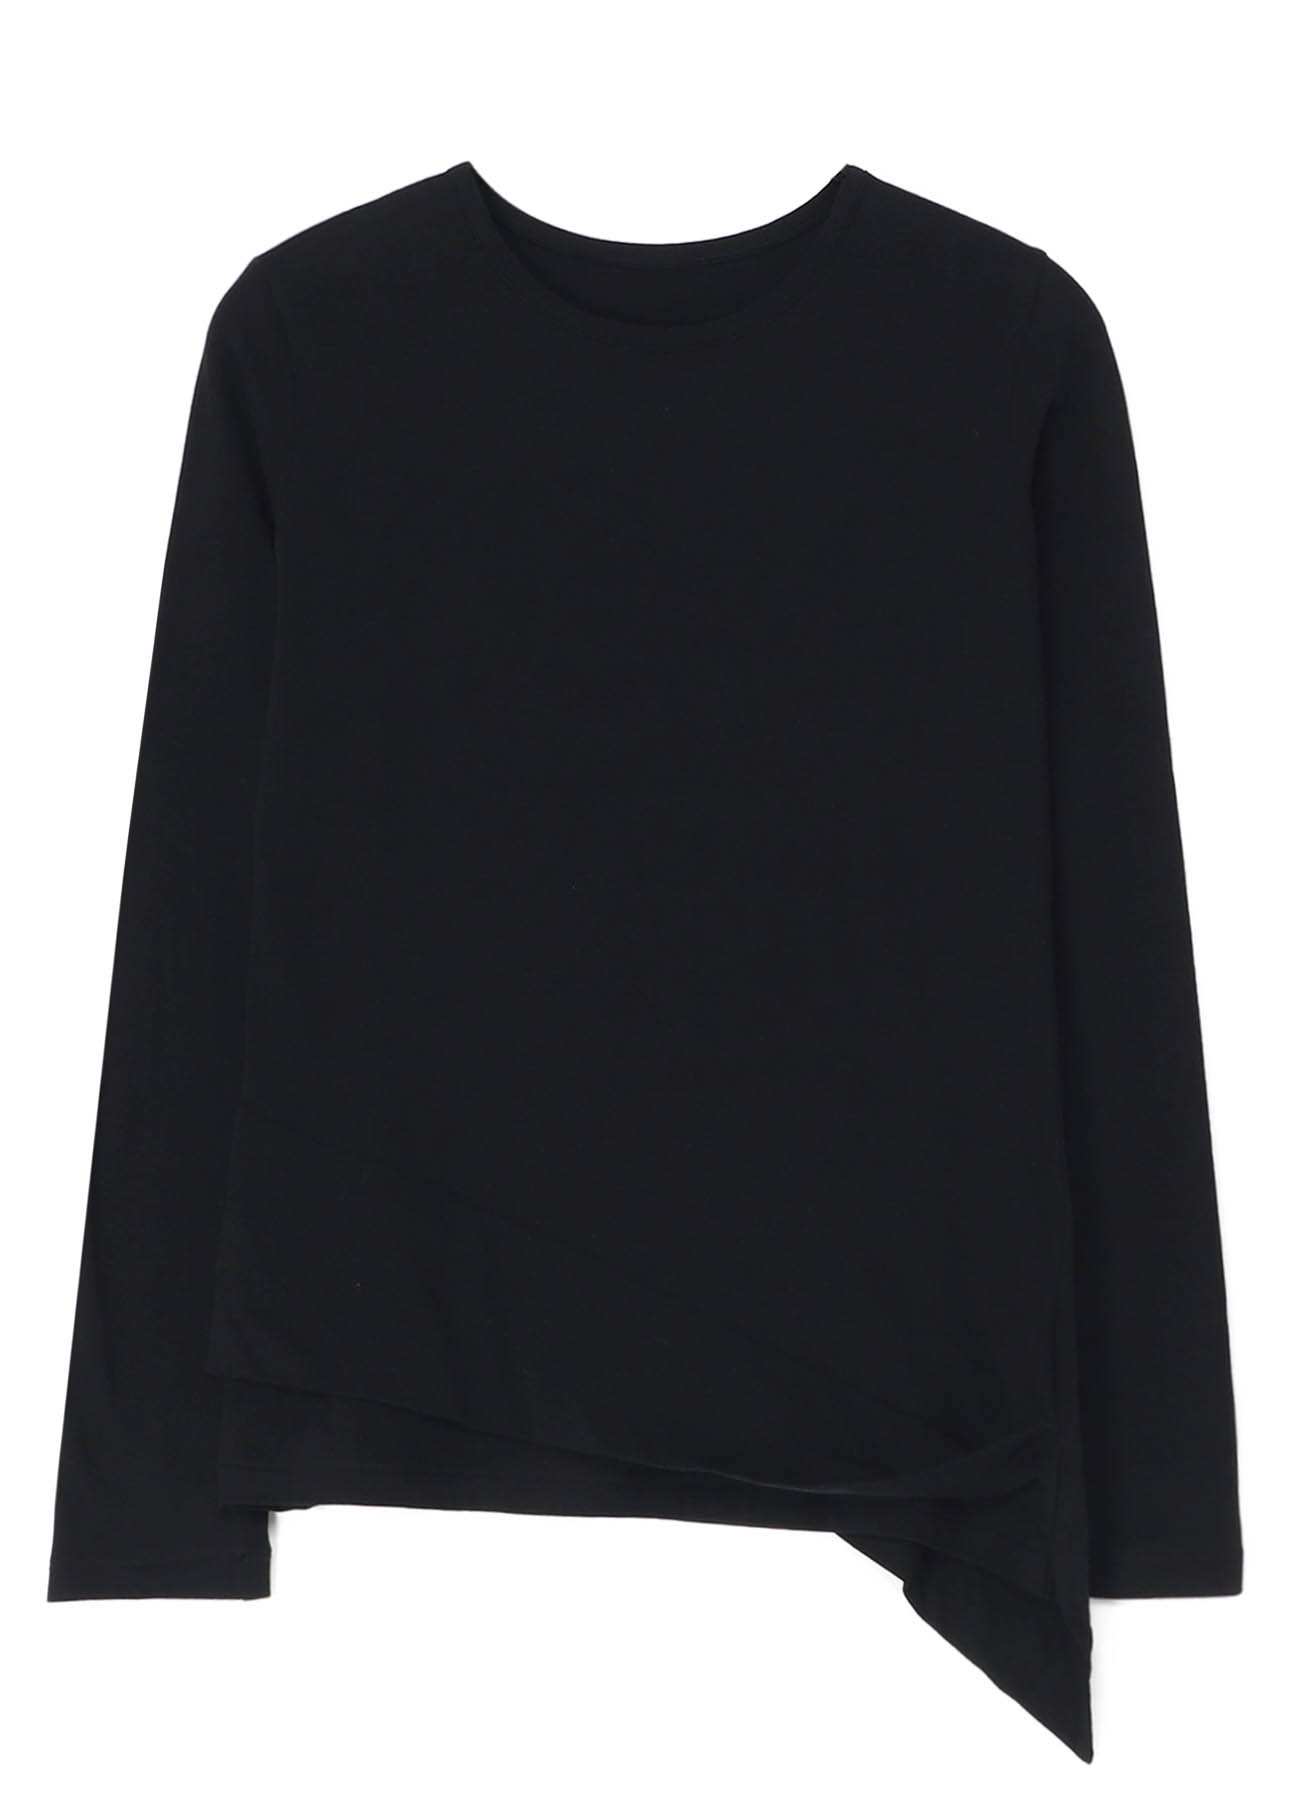 LONG SLEEVE T-SHIRT WITH FOLD OVER DETAILS